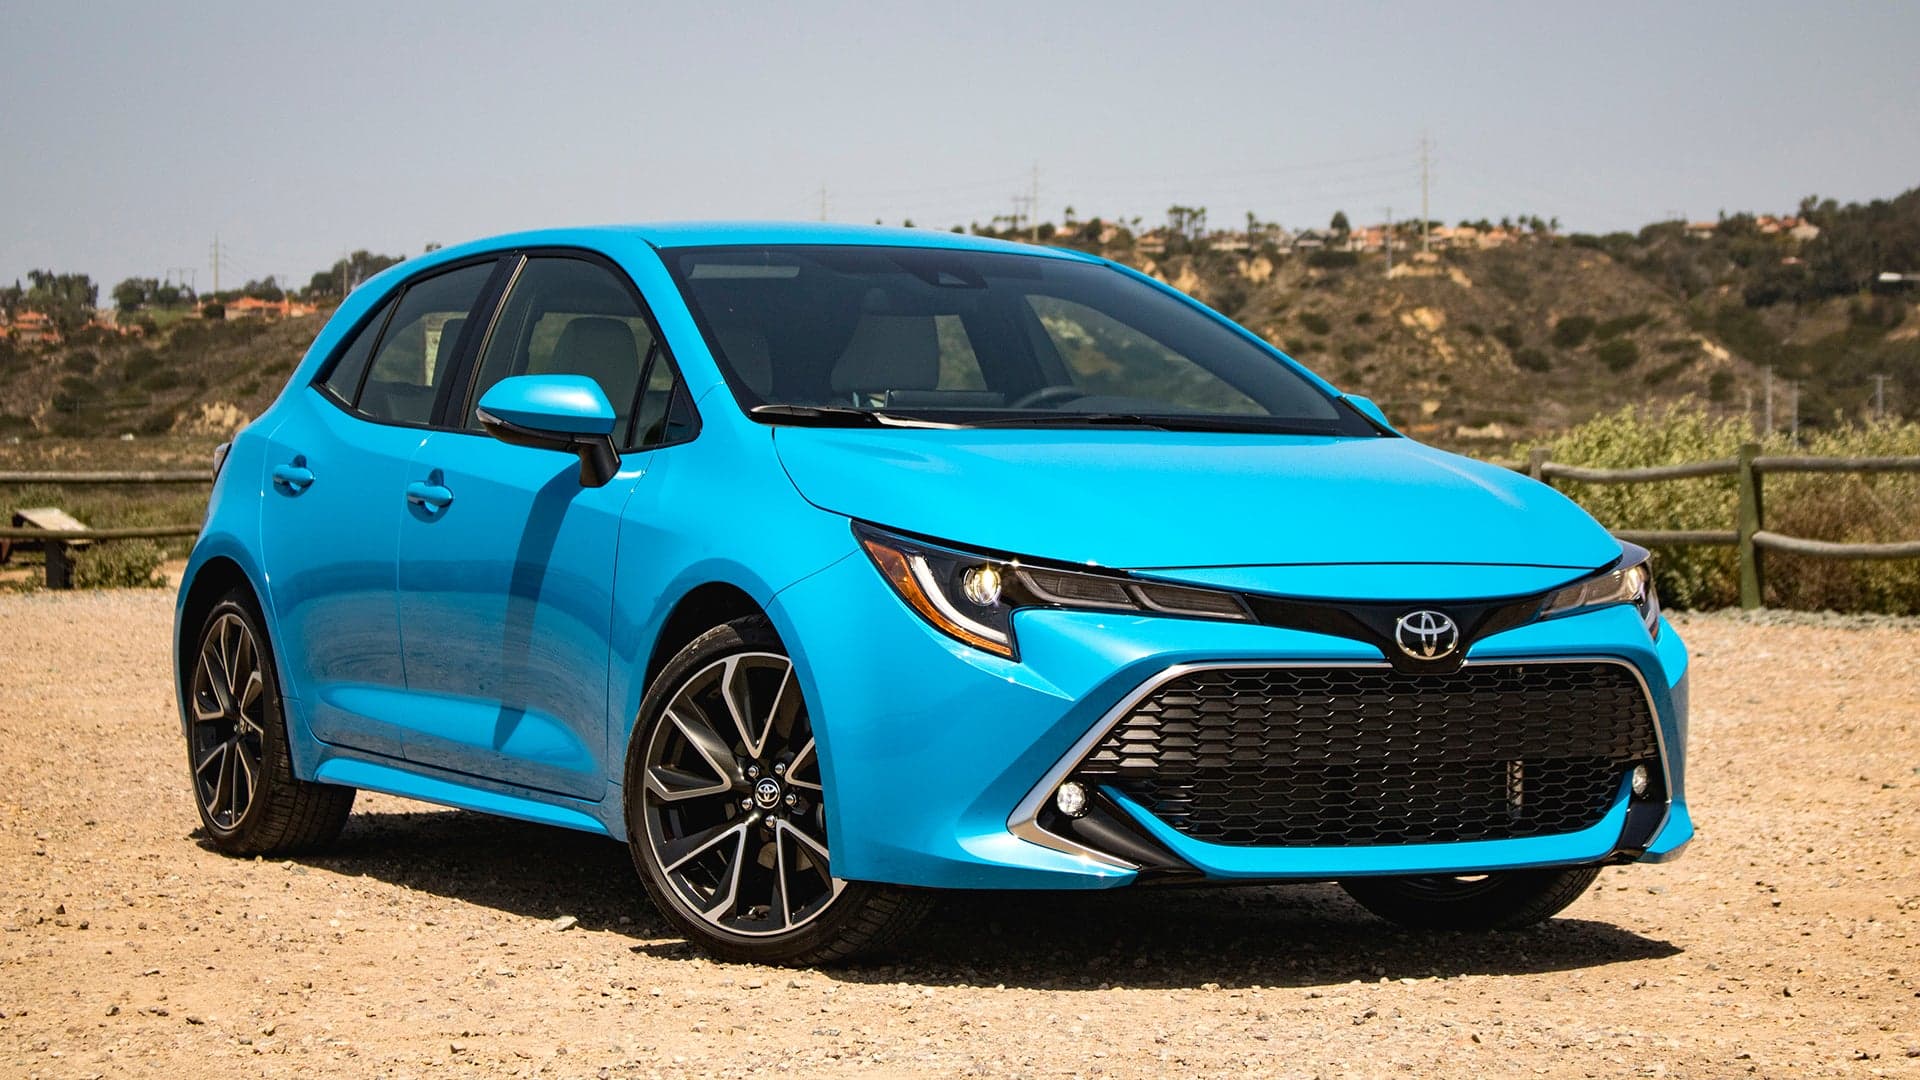 2019 Toyota Corolla Hatchback Review: The Not-Boring Corolla Is Back, Better Than Ever